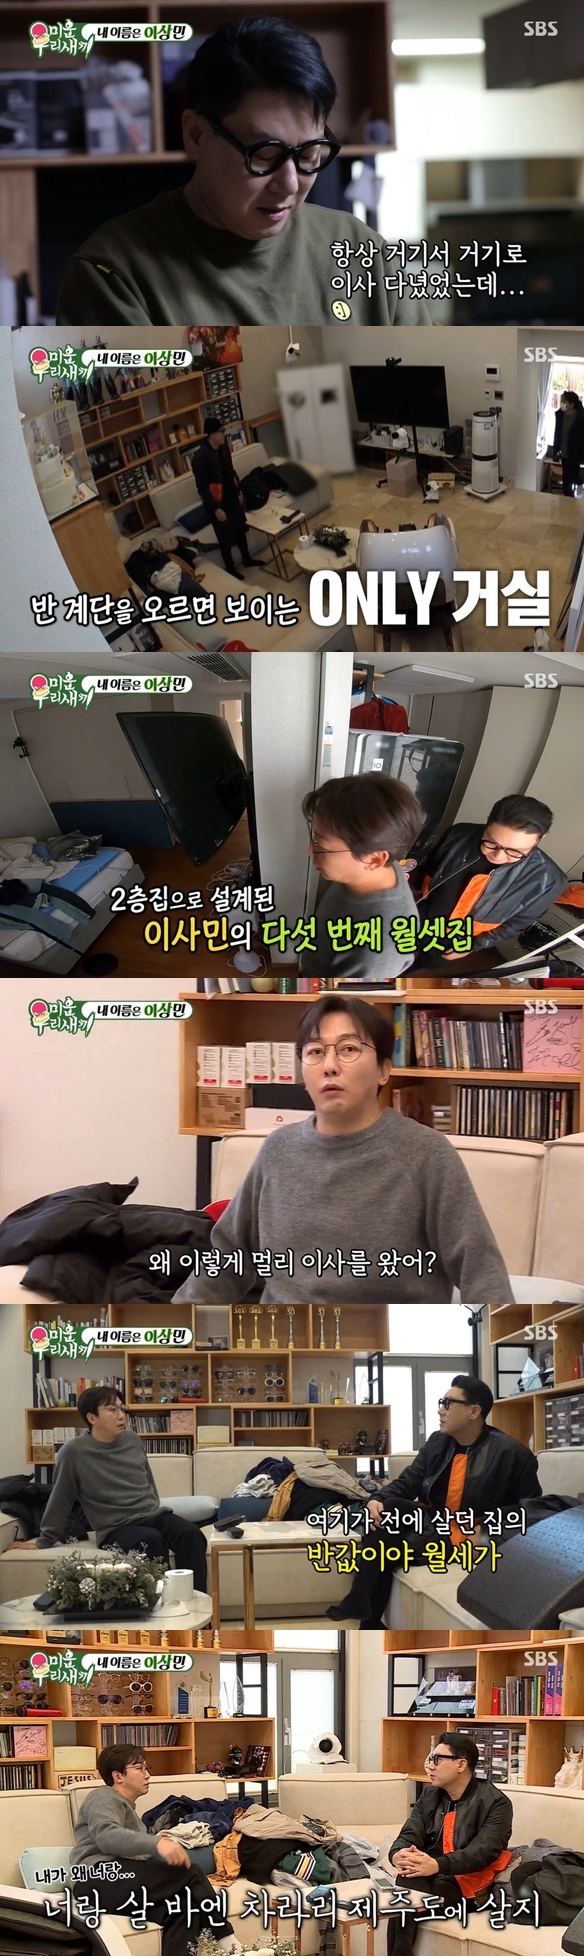 Lee Sang-min reveals Paju new homeSBS My Little Old Boy (hereinafter referred to as My Little Old Boy), which was broadcast on the 27th, depicted Lee Sang-min, who is moving out.Lee Sang-min packed up on the day, preparing for his fourth move.Lee Sang-min, who has moved to Paju, Gyeonggi Province after 50 years of Seoul life, said, It is a pungent.Lee Sang-min expressed regret, saying, This house does not want to leave.I moved to the office because I could not sign an extension contract. Lee Sang-min vowed, When I go back to Seoul, I go back to Seoul.Then, when I saw Lee Sang-min arriving at the new house, Shin Dong-yeop said, Is that the room? Seo Jang-hoon added, Suddenly, I feel like Im ruined.Lee Sang-mins new Walsett home was a two-story house.Tak Jae-hun, who visited the new house, asked, Why did you move so far? and Lee Sang-min replied, There was no way, this is half the price of the house I lived in before.I asked for 14 pyeong and 18 pyeong monthly rent of 2 million won. Tak Jae-hun sympathized and said, I am worried.I dont know how long Ill be at my moms house, she said.Come here, brother will write the second floor and I will write the first floor, Lee Sang-min told Tak Jae-hun.Tak Jae-hun said, I do not live with you. I come here or Jeju Island, but it seems like that.Tak Jae-hun told Lee Sang-min that he had Choices this house: You didnt Choices, you were forced to come.When were together, throw away Stephanie Herseth Sandlin, youre forced to come here, you have no money and you dont have anything, he said, throwing a stone fastball.Lee Sang-min said, If you think so, why can not you get a house in Seoul?Two of the two, Tak Jae-hun, said, From the beginning, we were soulful and we did not fit in. Lee Sang-min showed up to his original point.Tak Jae-hun said, You lived in Gangnam too, and Lee Sang-min nodded.In the appearance of Lee Sang-min, Tak Jae-hun sighed and said, I am sad and Come to Seoul right now.Since then, the two have talked on the terrace, grilling pork belly.Photo: SBS broadcast screen